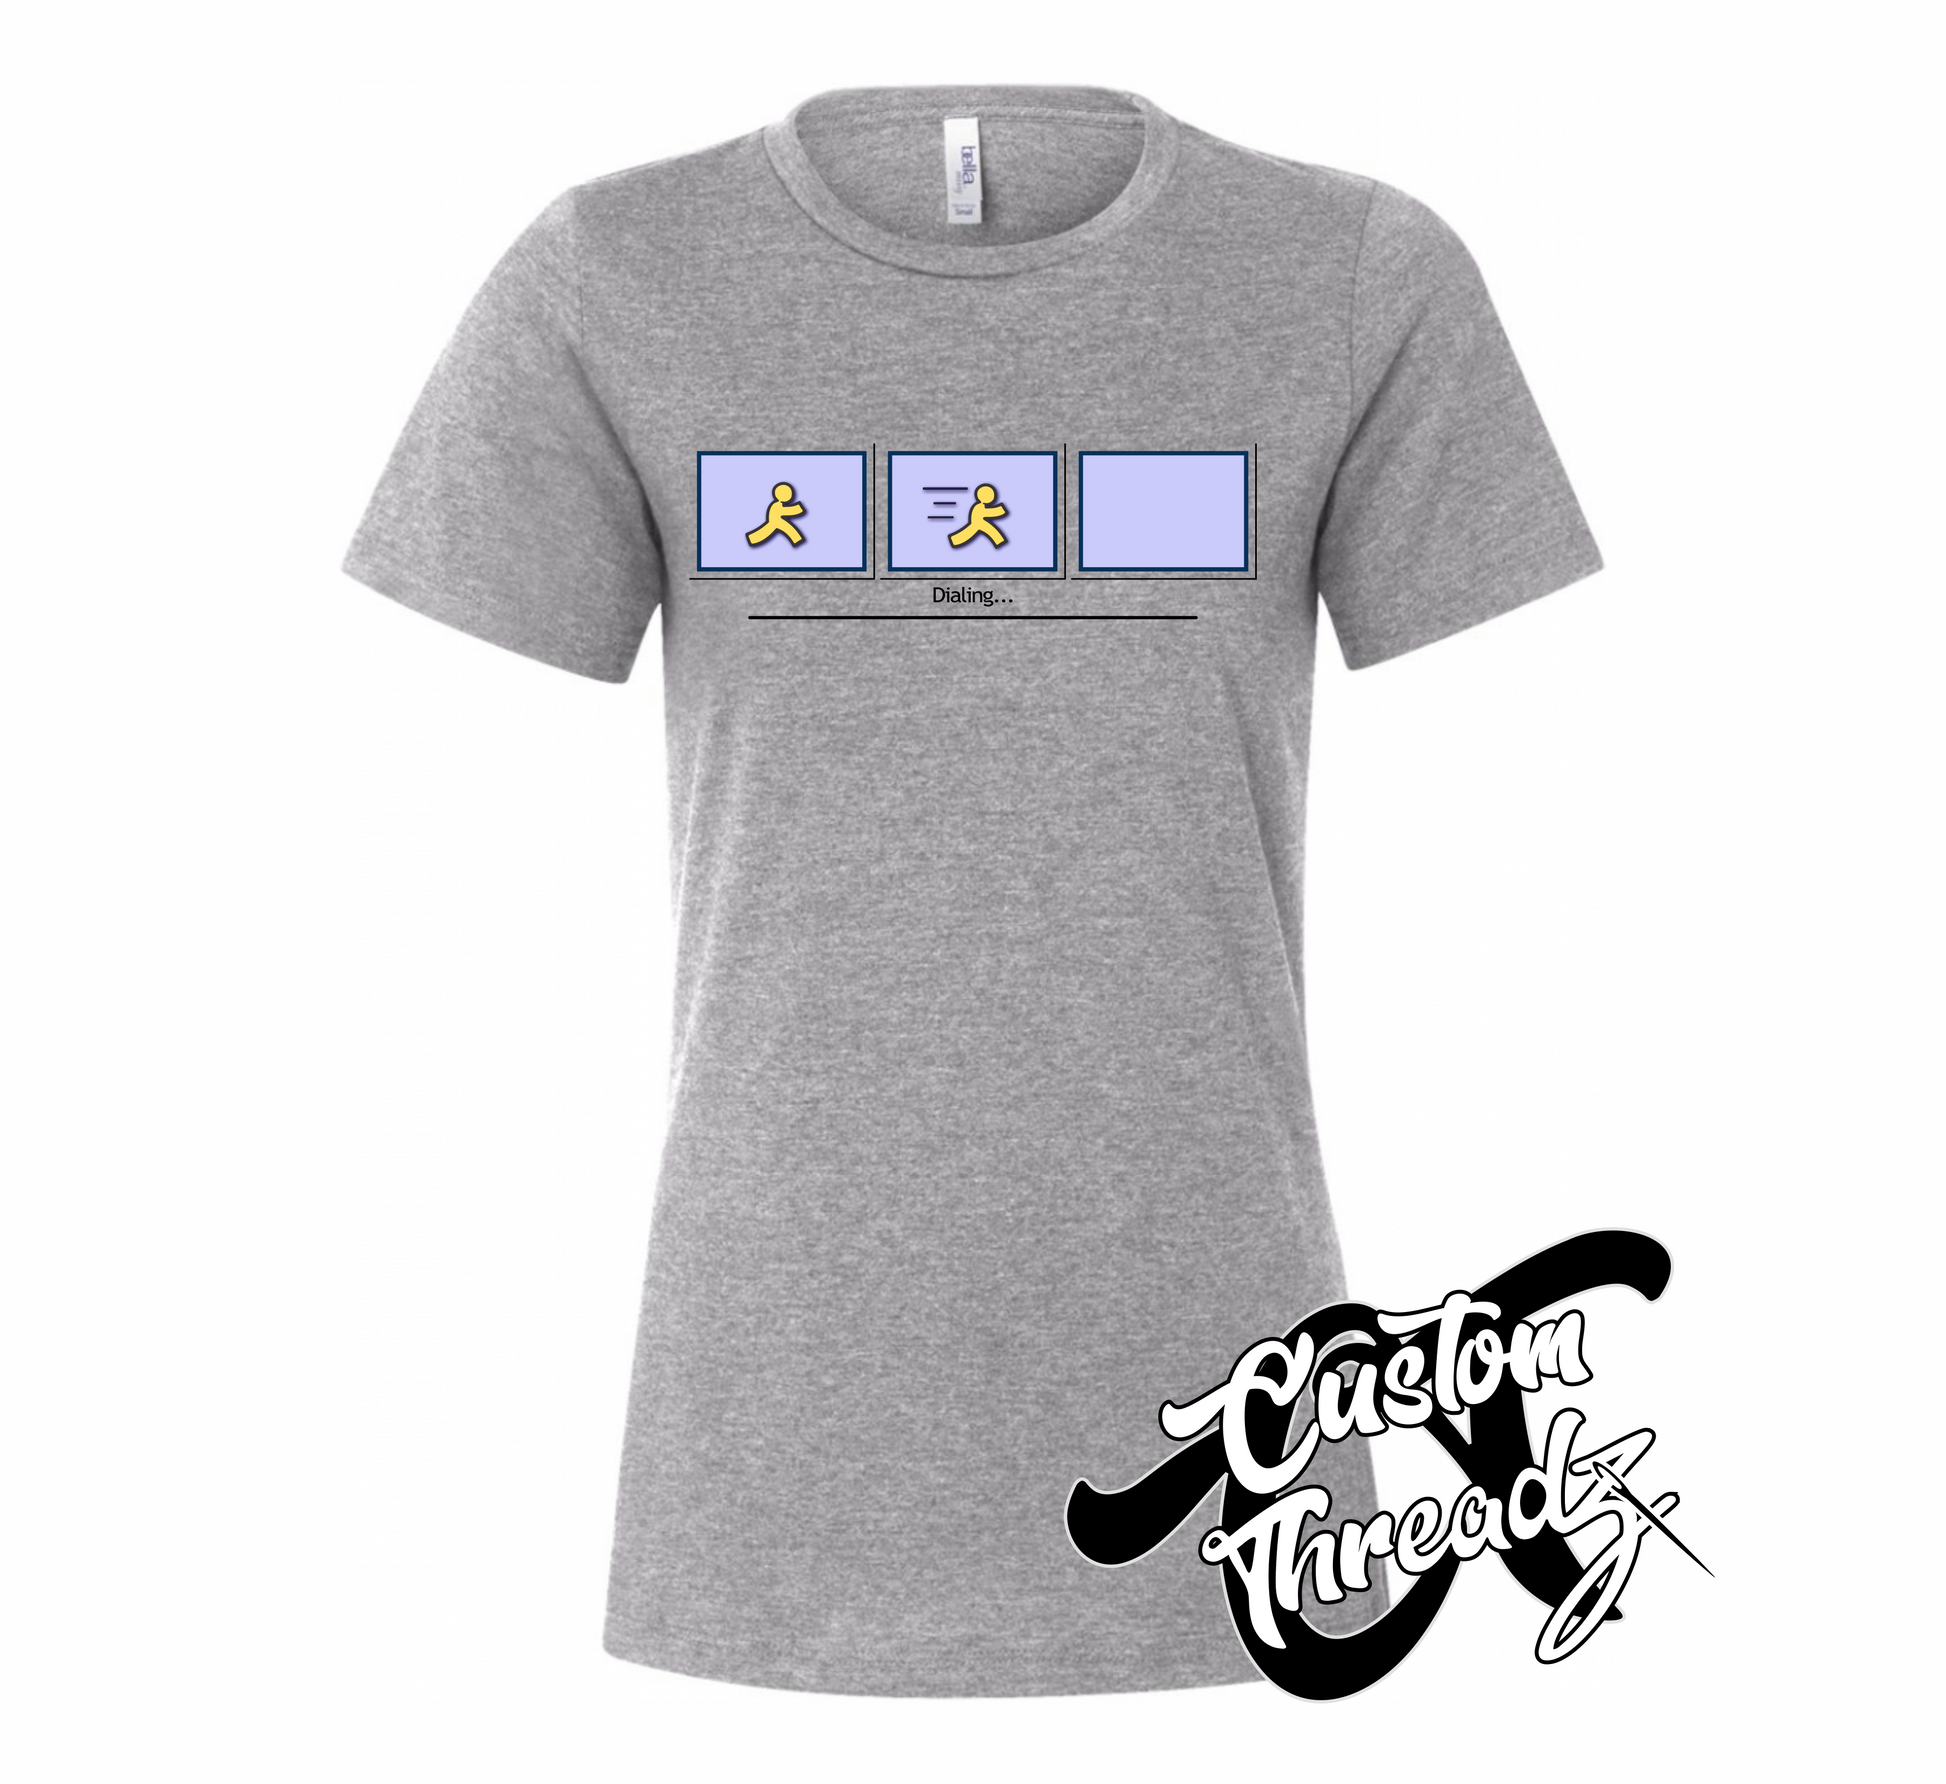 athletic heather grey womens tee with AOL dial up DTG printed design